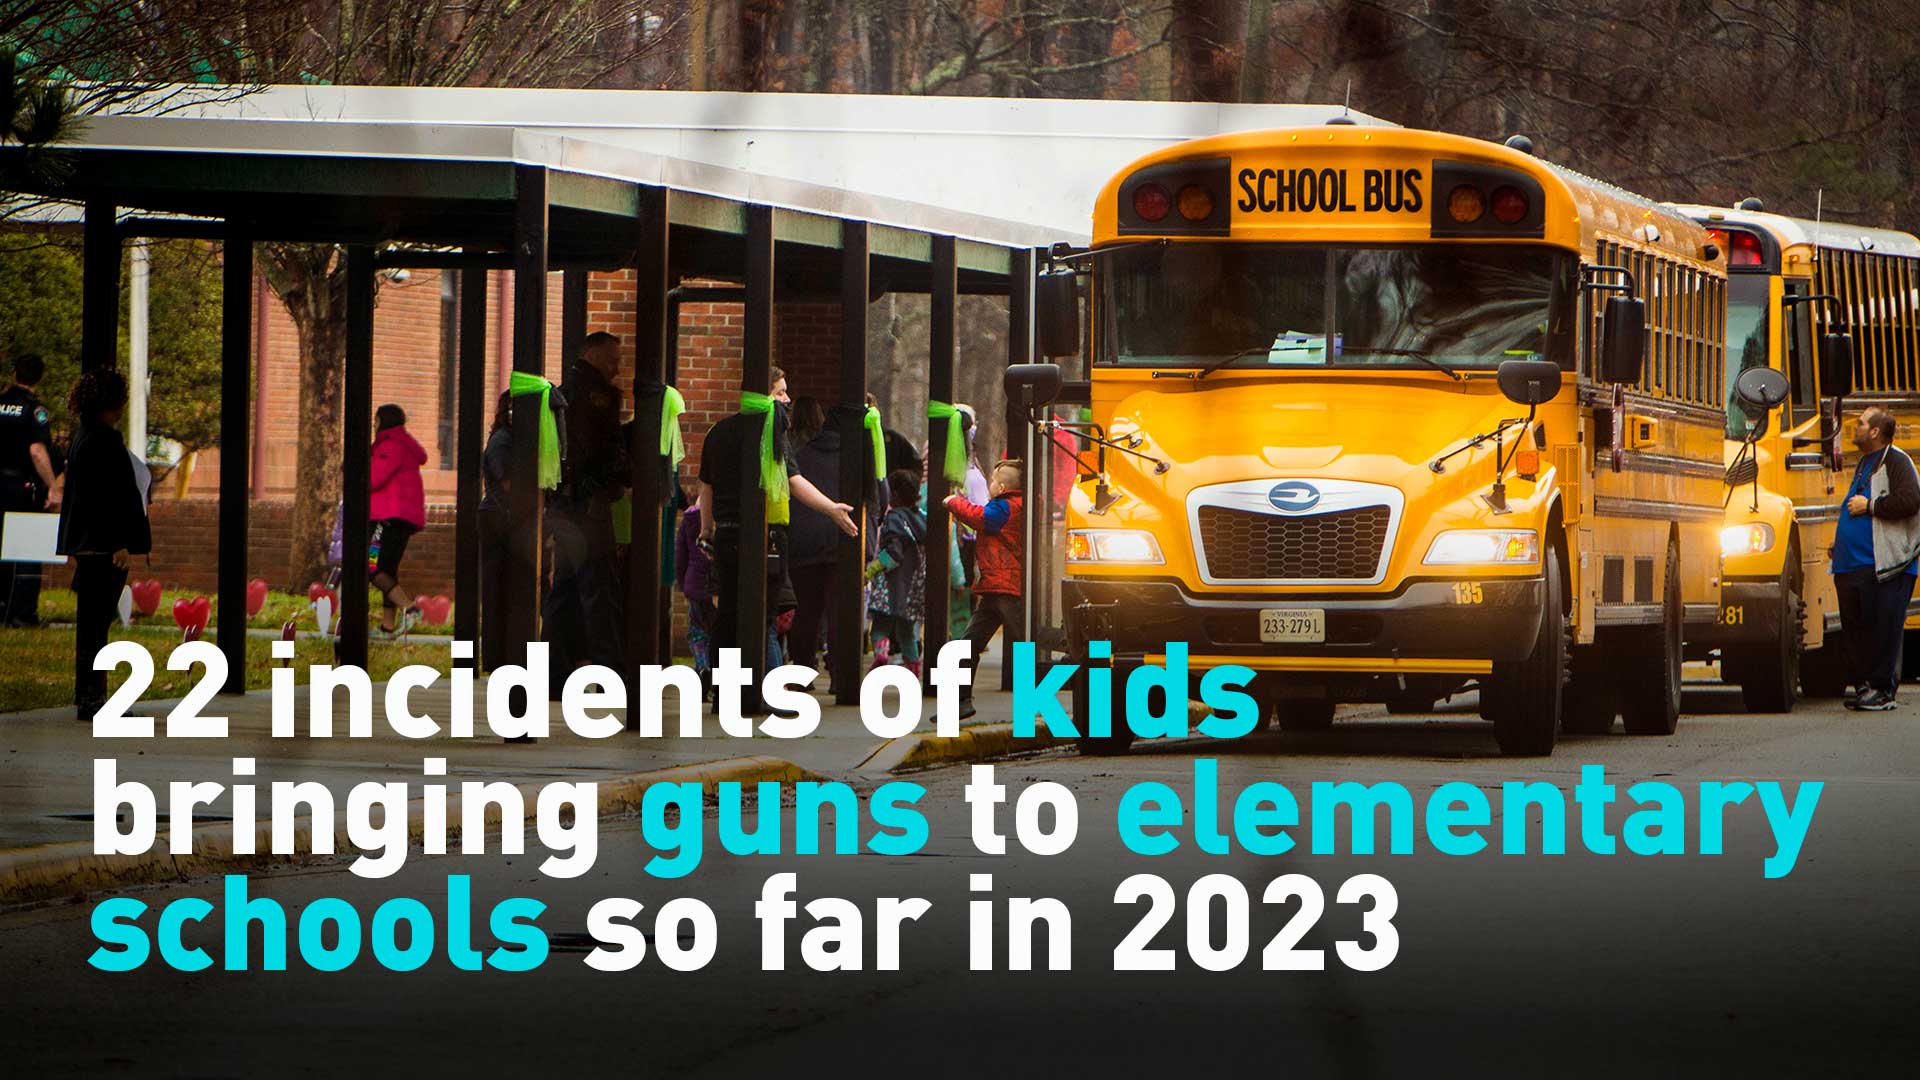 22 incidents of kids bringing guns to U.S. elementary schools so far in 2023